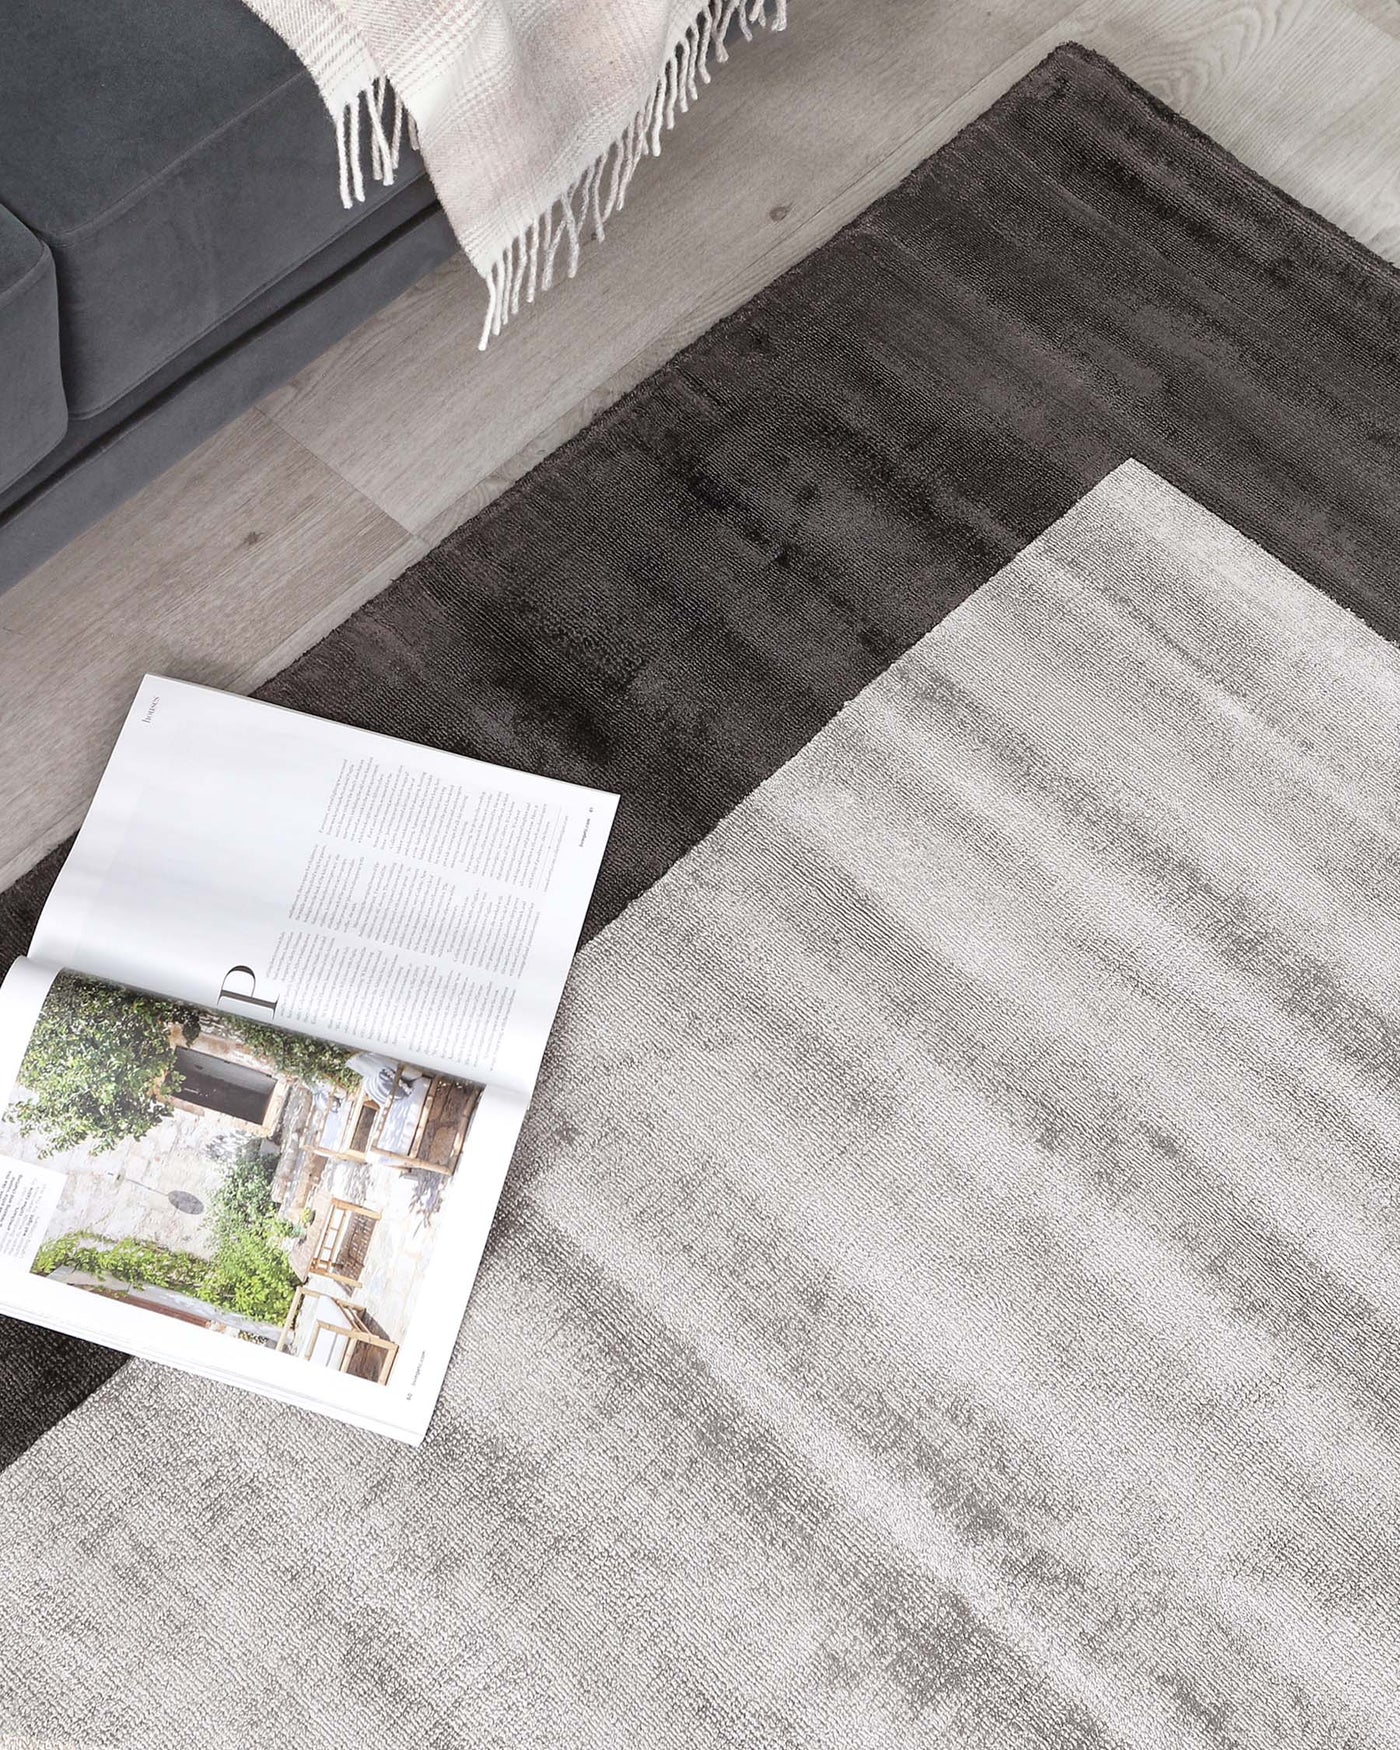 Modern ombre area rug transitioning from dark grey to light grey, complemented by a beige fringed throw blanket partially draped over a grey corner sofa, placed on a light wooden floor with an open magazine for a cosy, minimalist aesthetic.